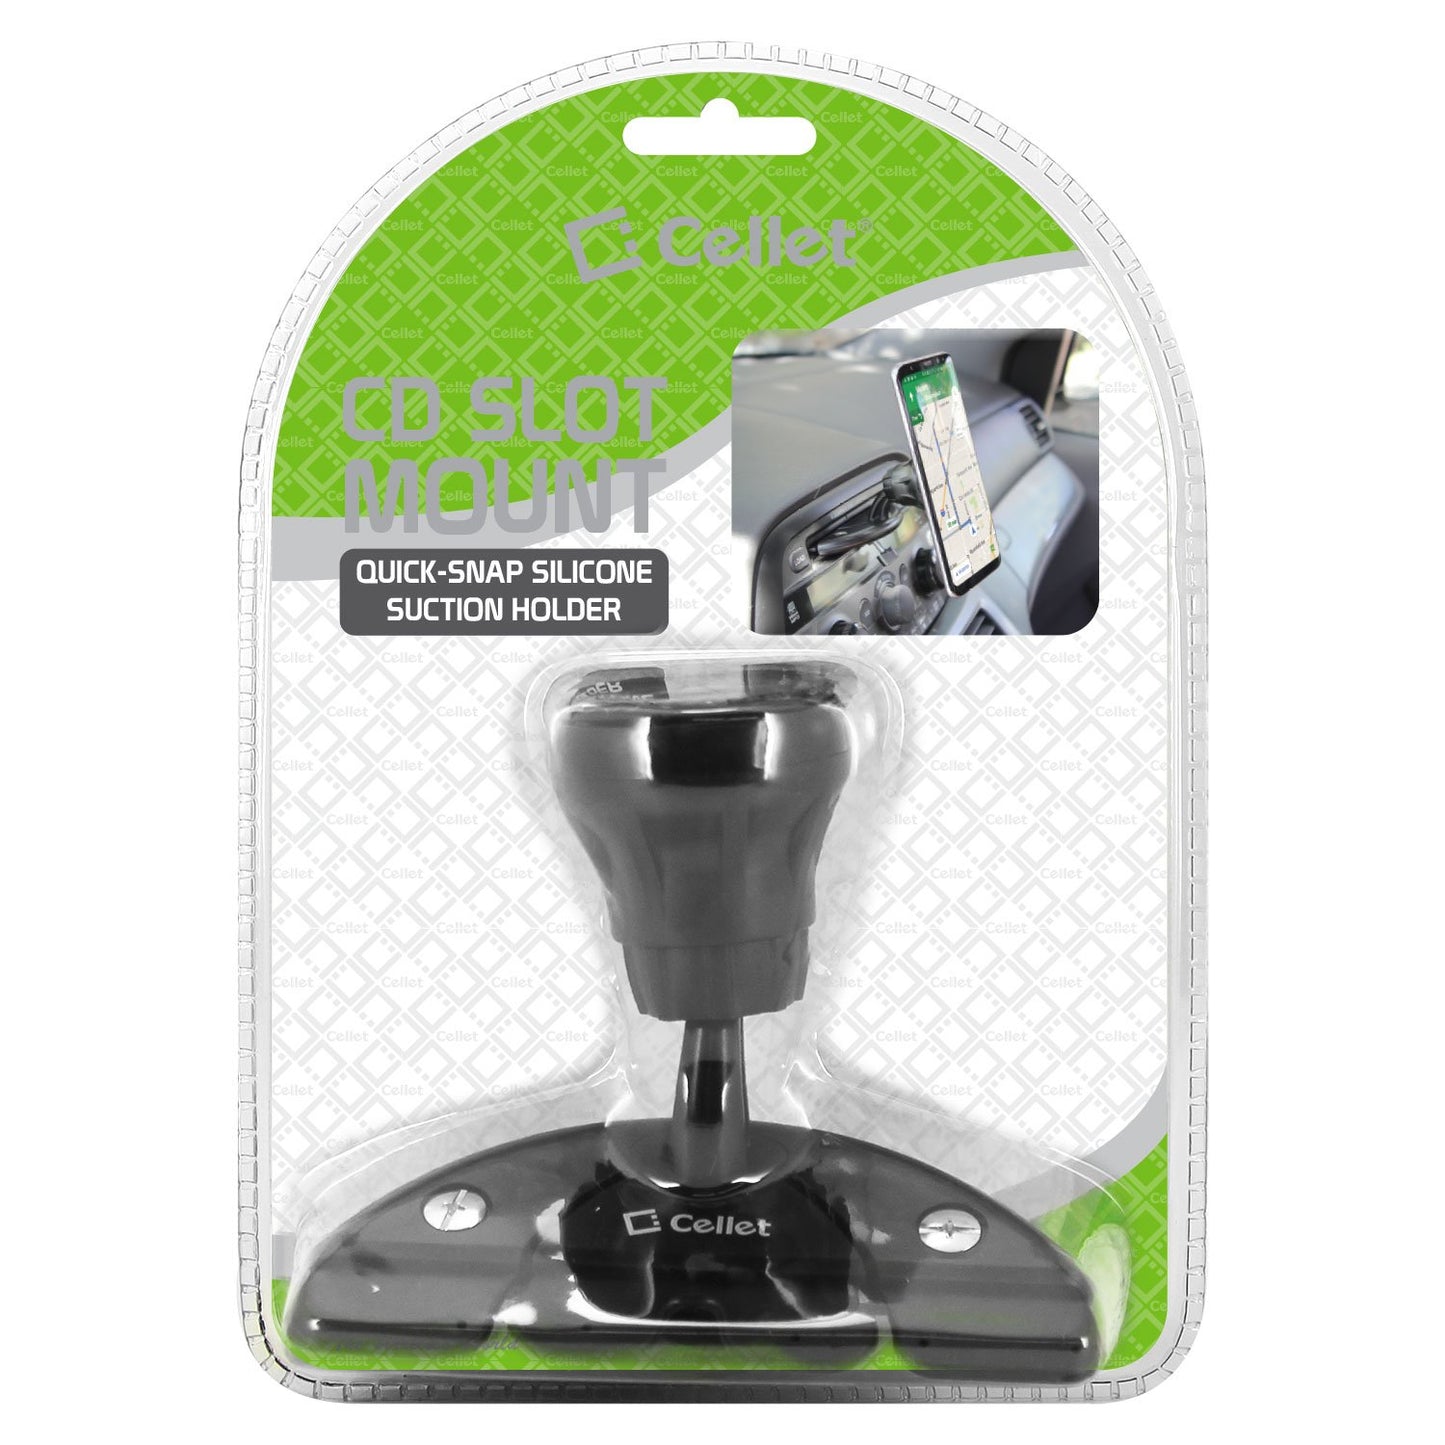 PHCD23CN - Cellet CD Slot Suction Phone Mount for iPhone 13 Pro Max and More - Extra Strength Suction Cup with Quick-Snap Technology